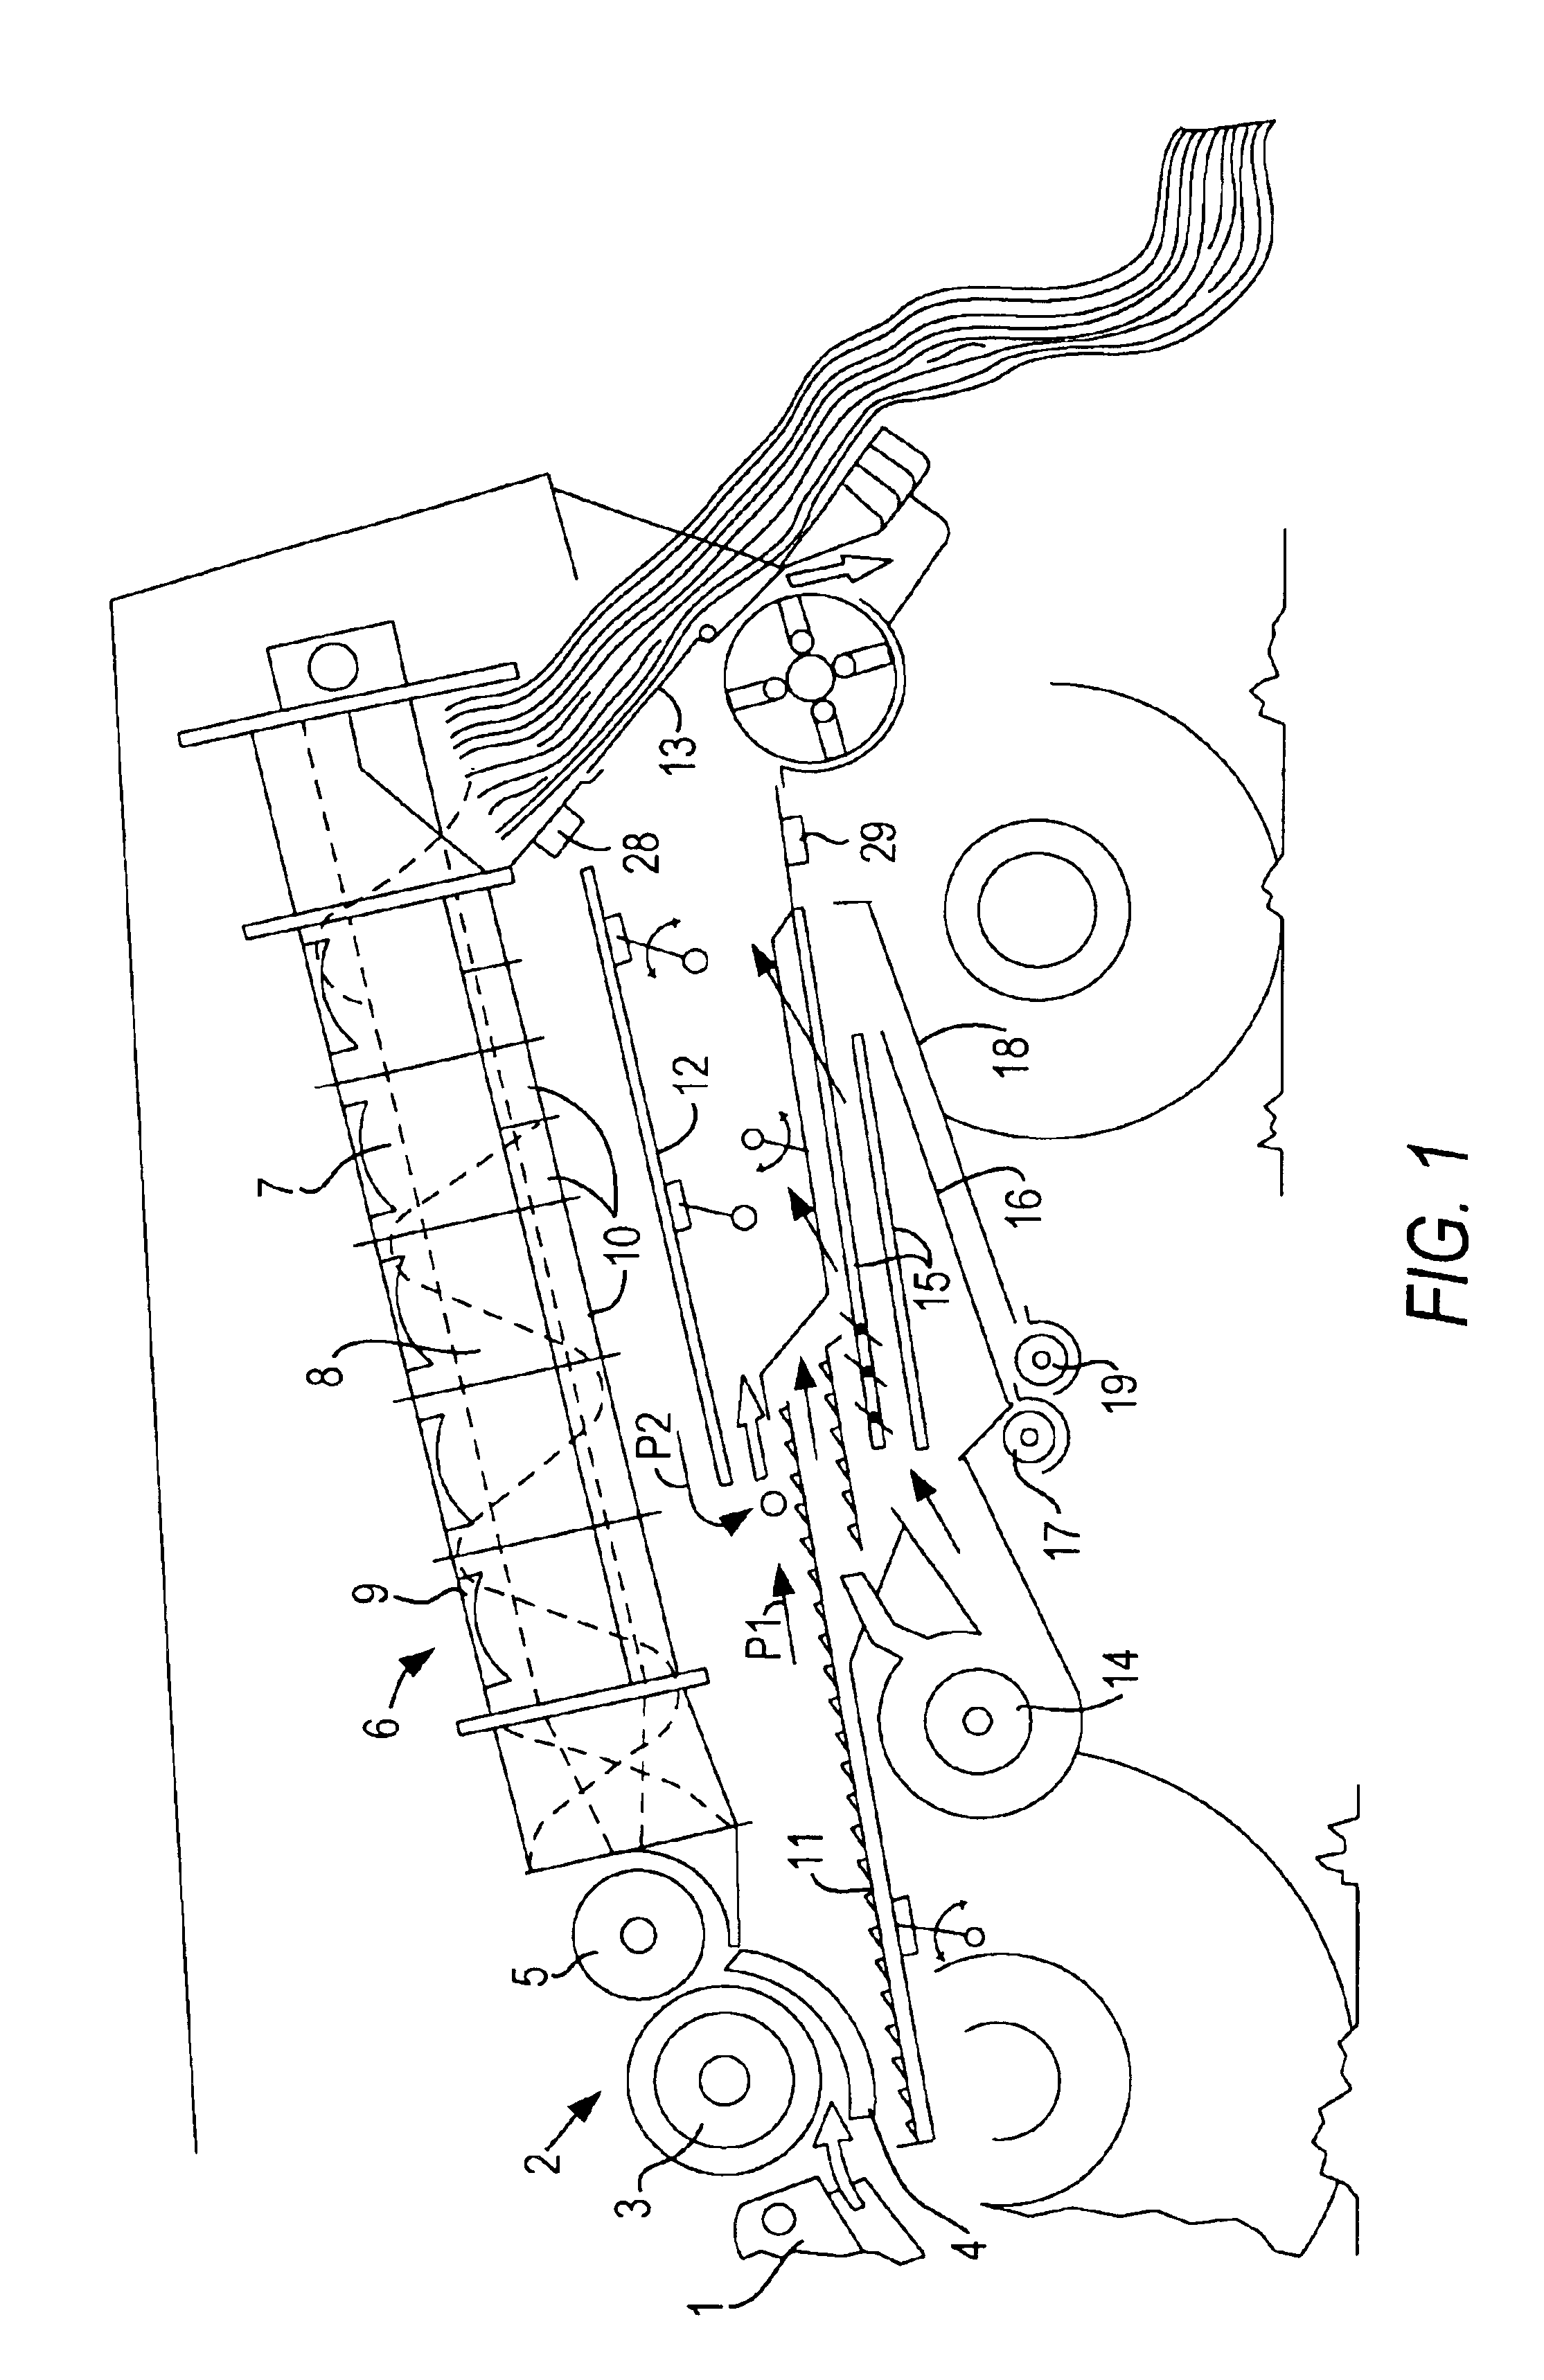 Method and device for separating a flow of crops